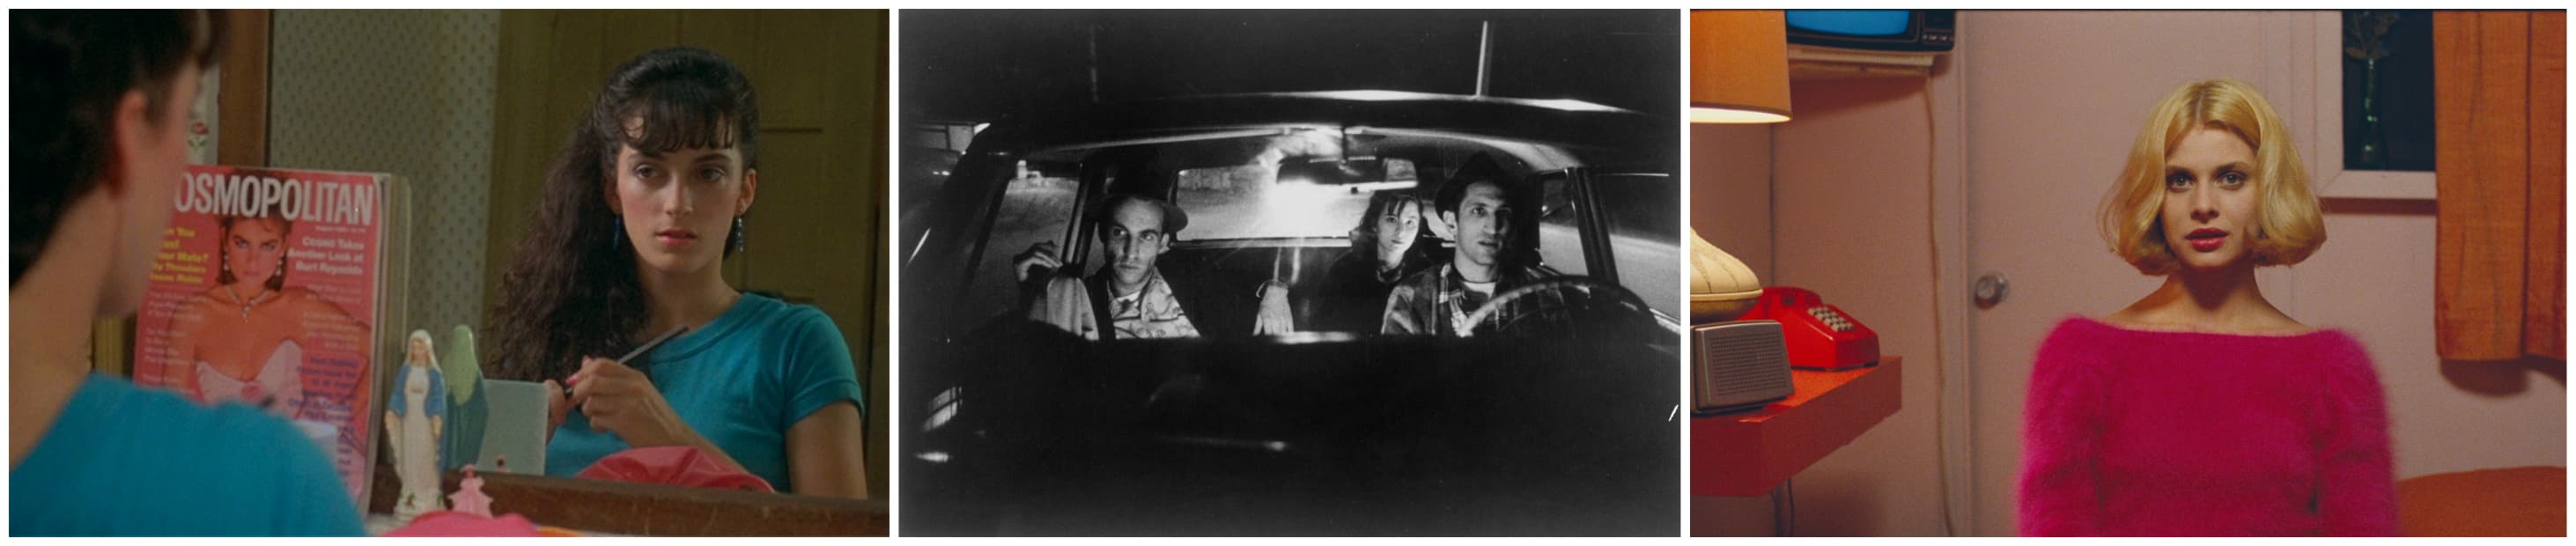 Left to right, stills from the films "Old Enough," "Stranger Than Paradise" and "Paris, Texas." (Courtesy Brattle Theatre)